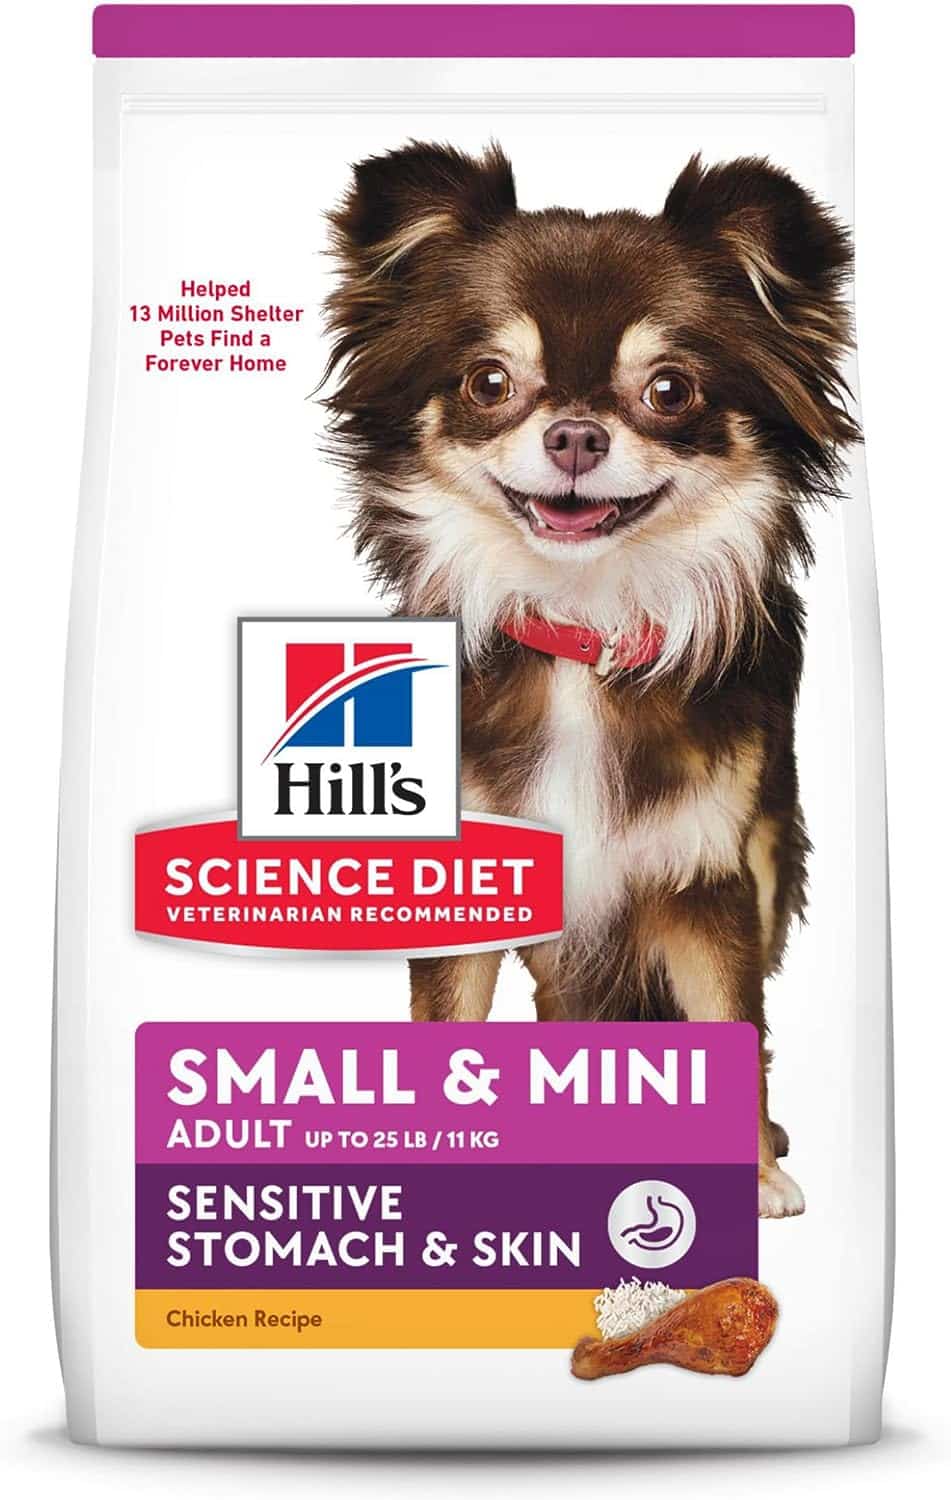 Hill's science diet small and mini breed dry dog food